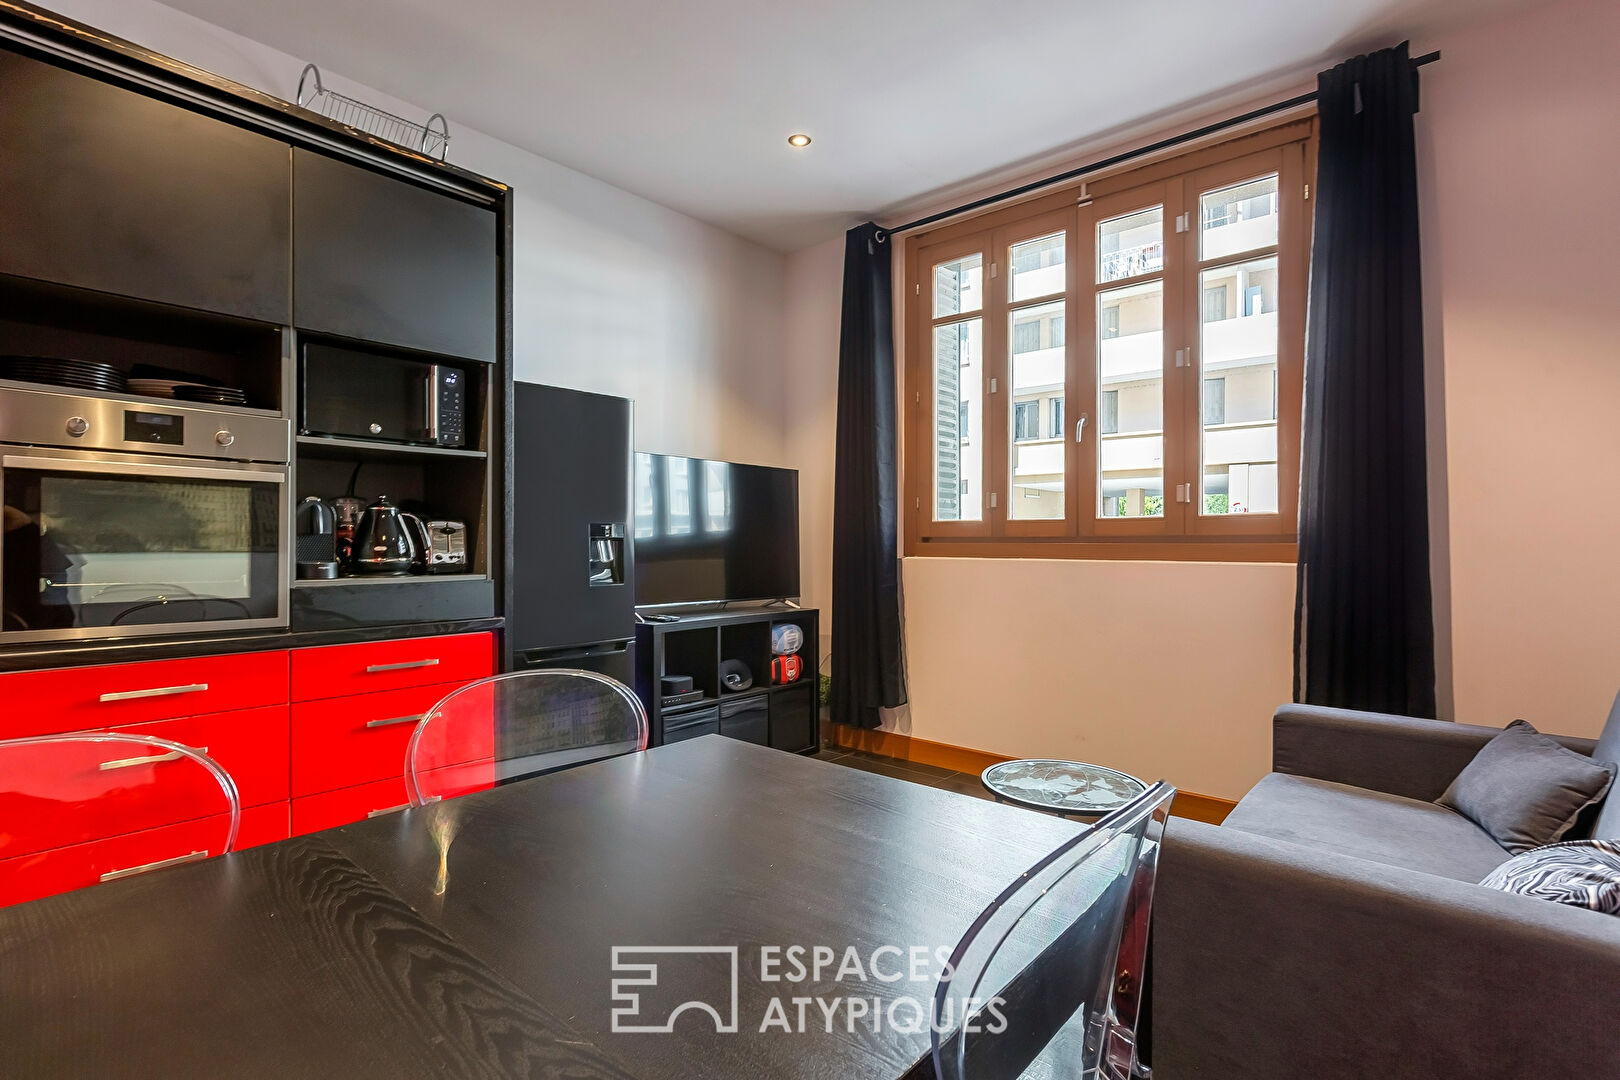 Renovated apartment in the heart of Brotteaux